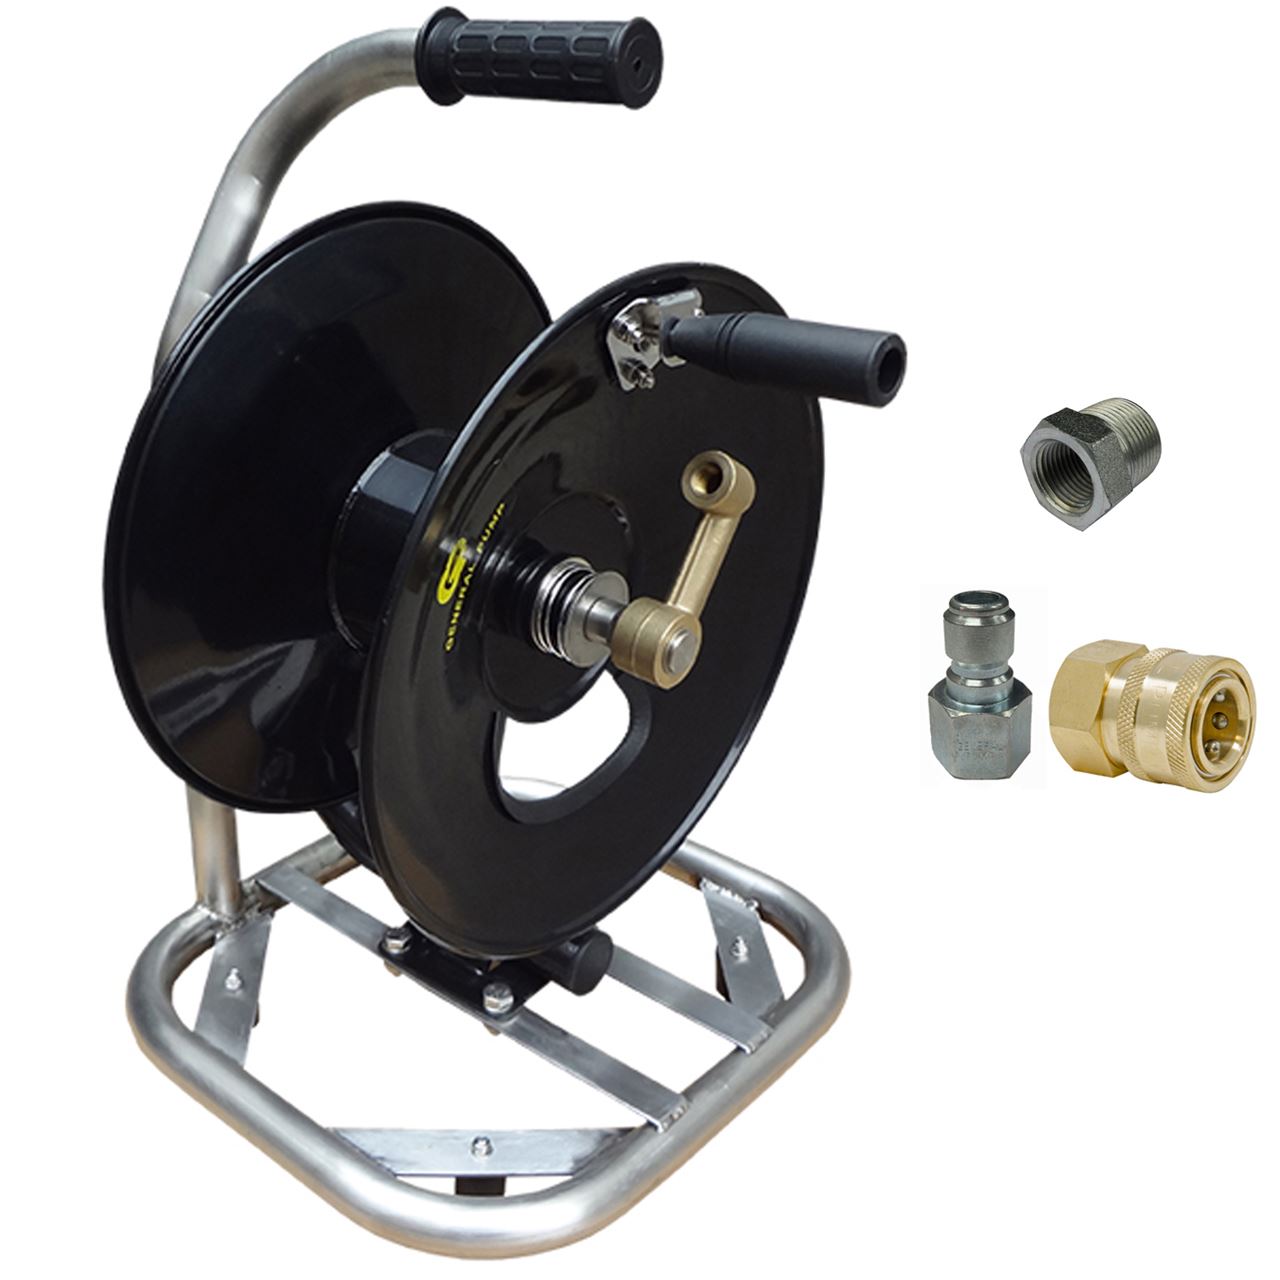 https://www.pwmall.com/content/images/thumbs/0056951_sewer-jetter-kit-ball-valve-150-x-14-hose-reel-nozzles.jpeg